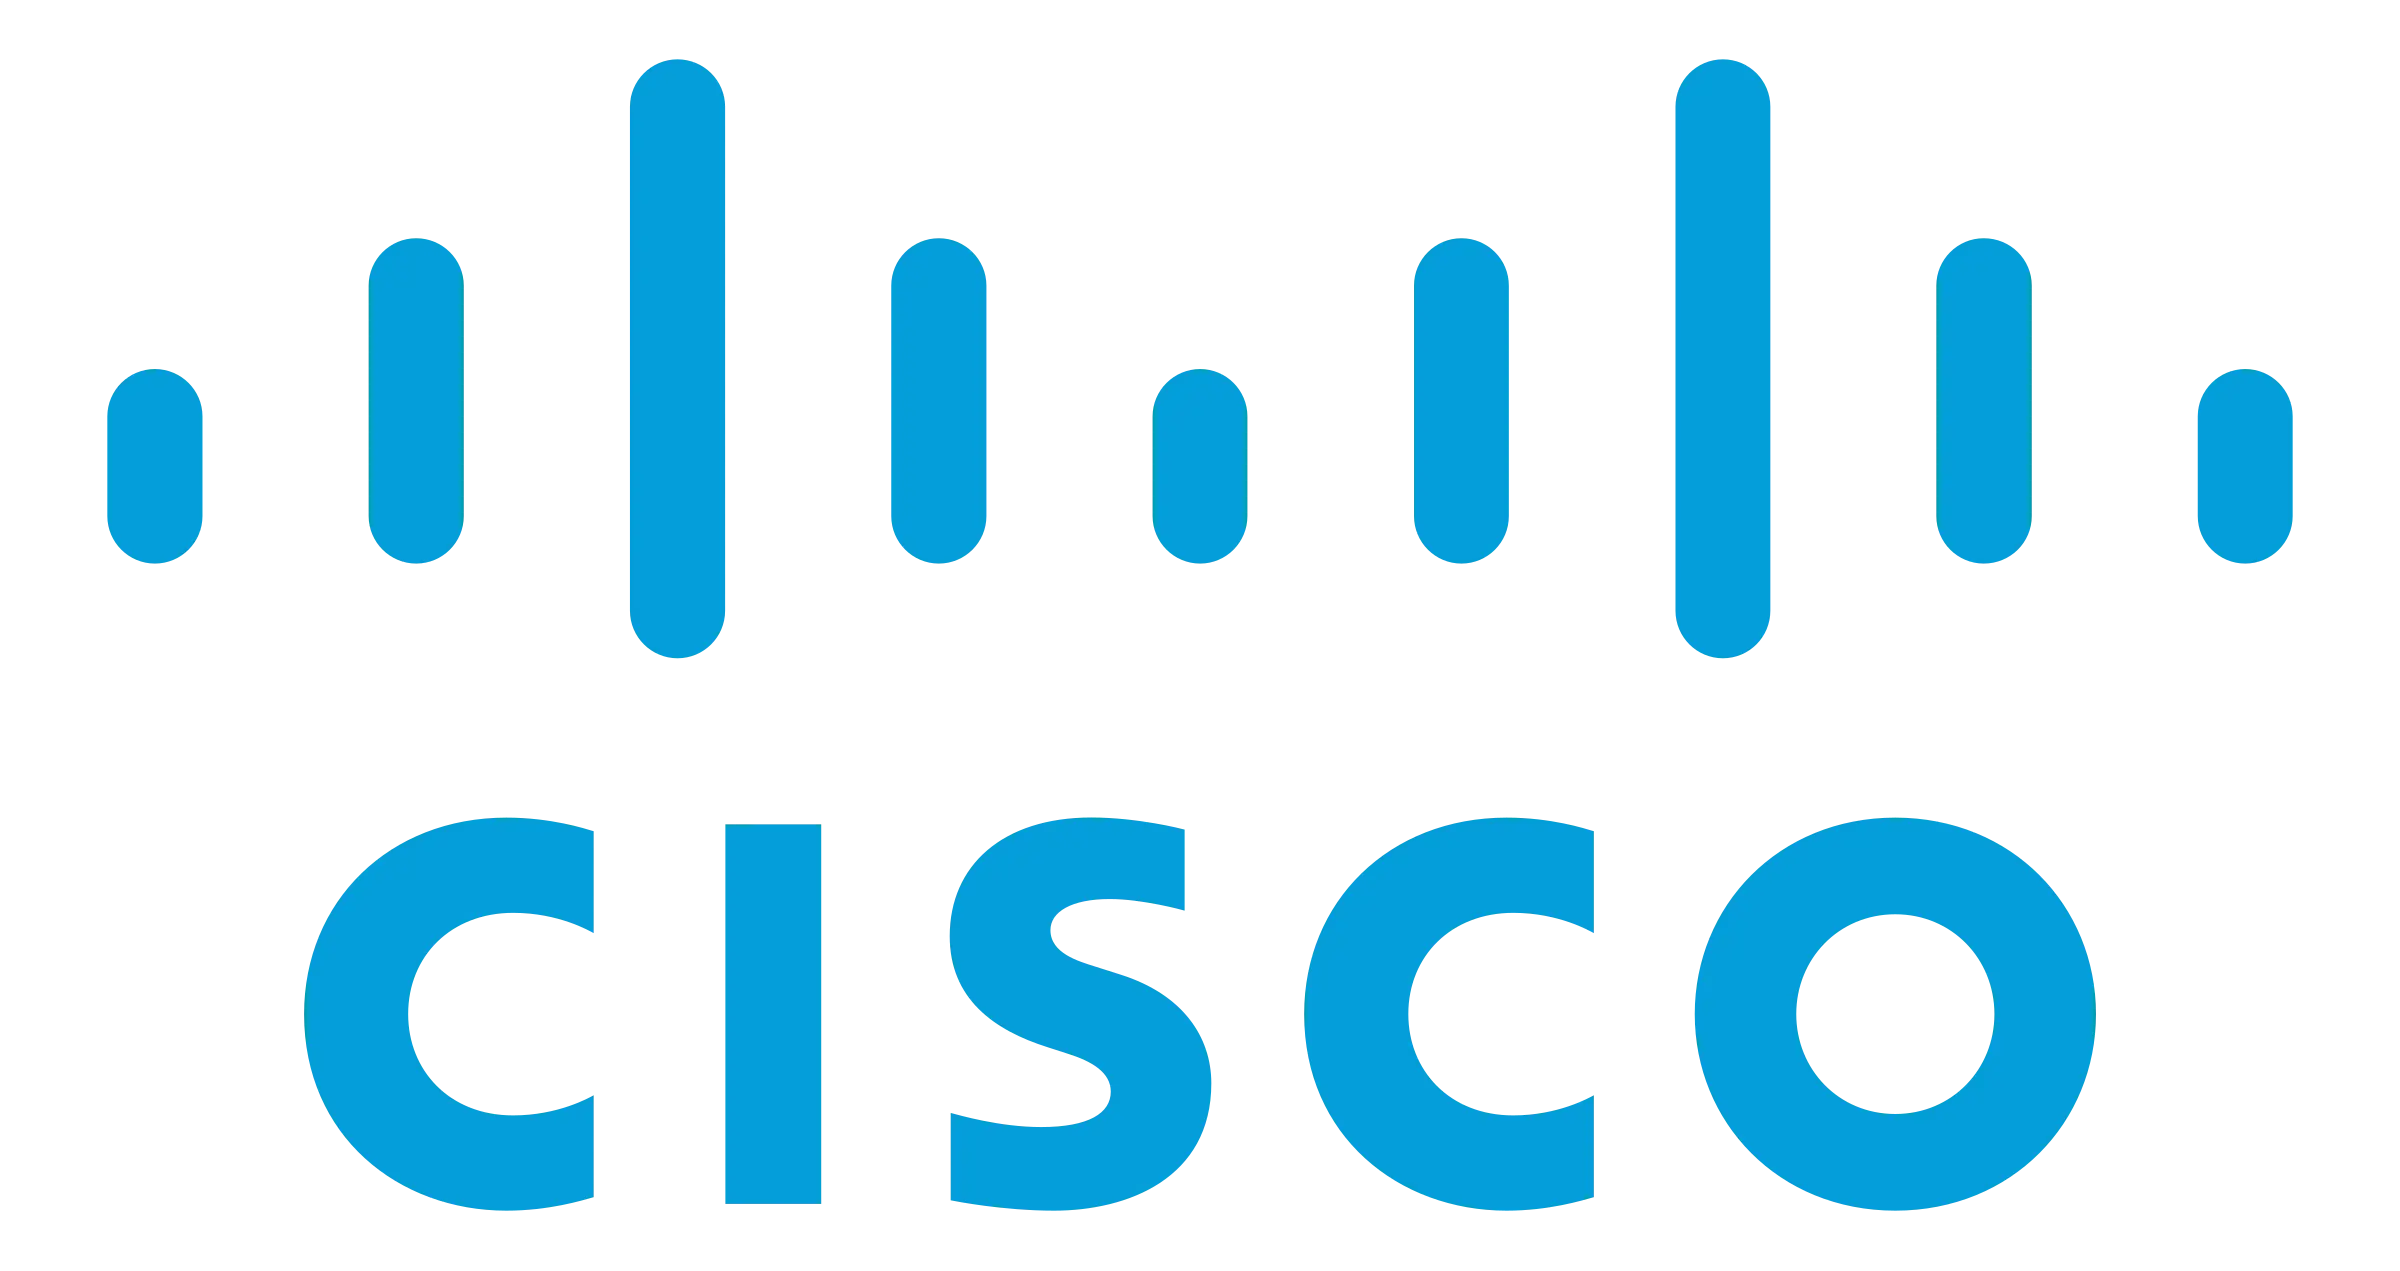 CISCO Networking Solution & Support by ACCESSYSTEM® Technologies Inc - Digital Transformation, IT, IoT & AI Solution & Services.